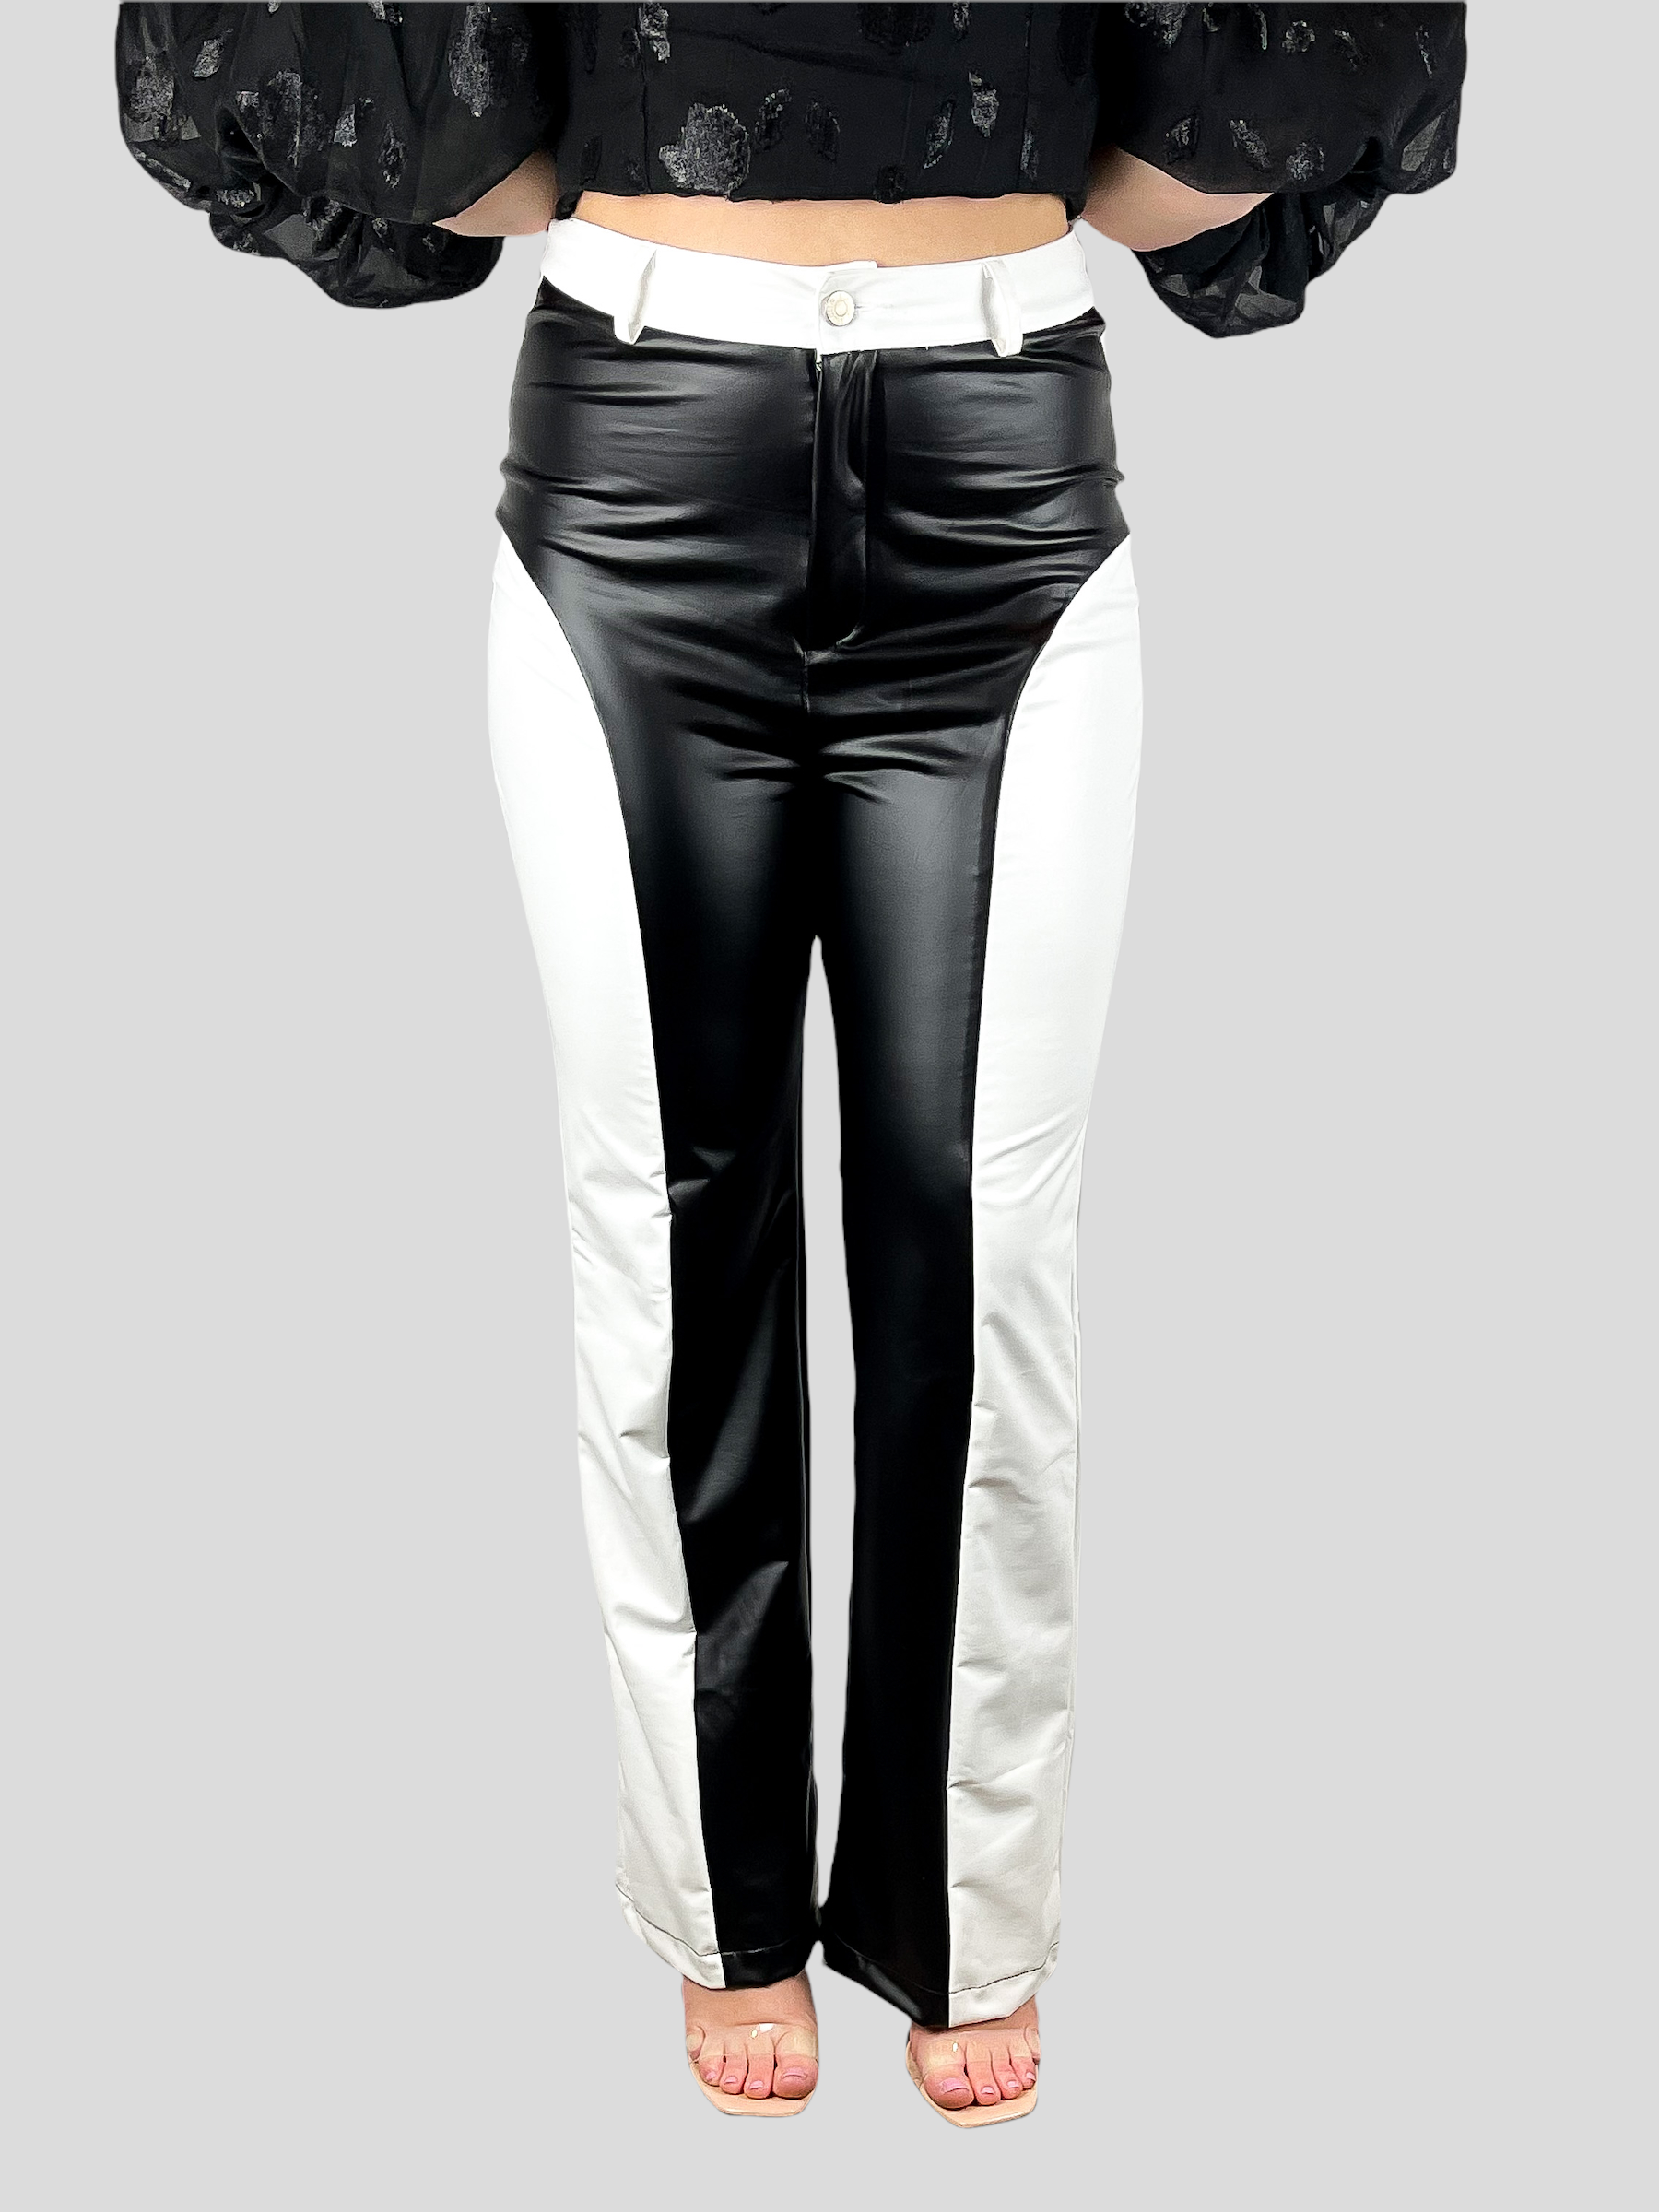 Leather Pants & White Button Down in Paris - Lisa DiCicco Cahue